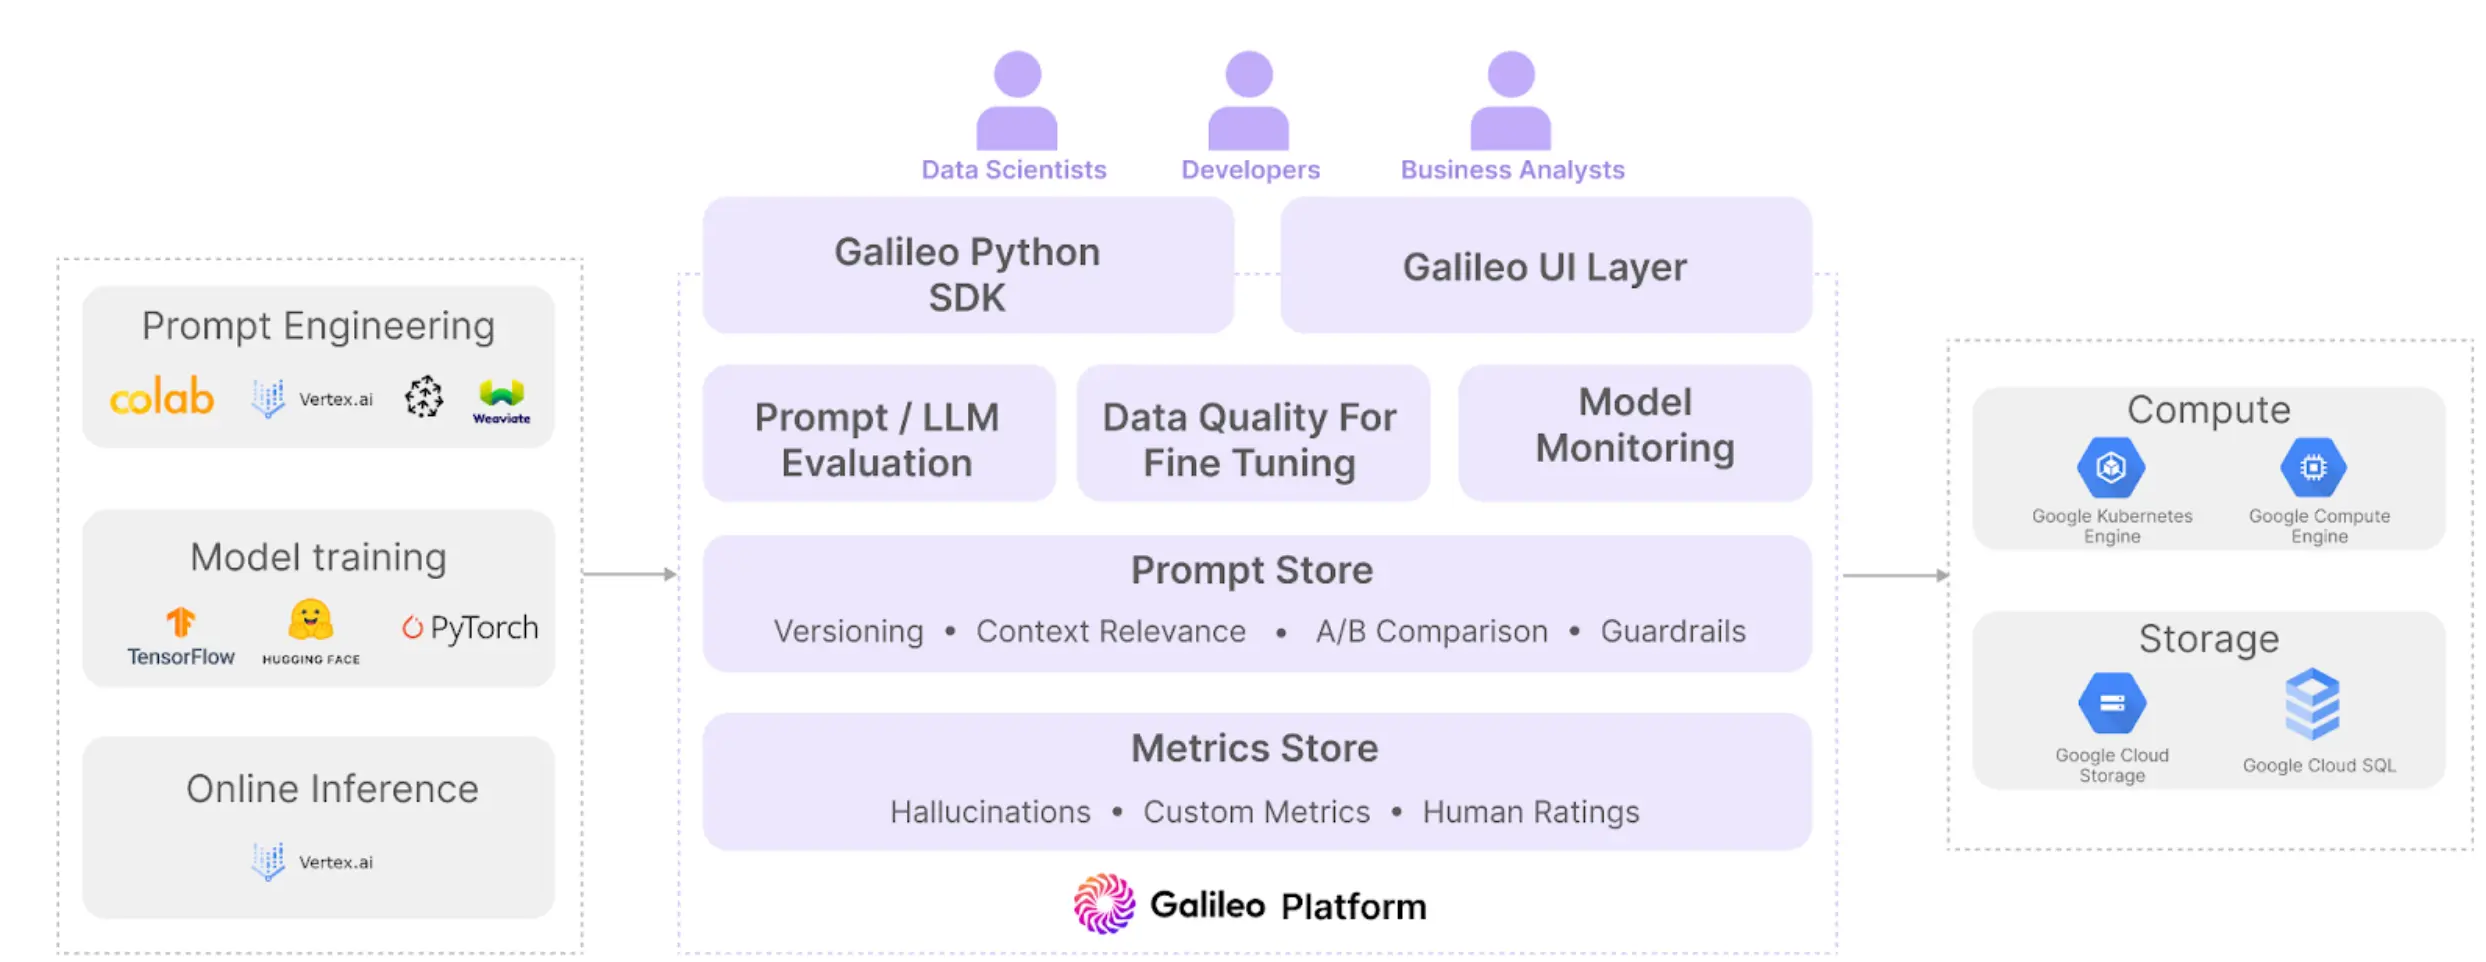 How Galileo’s evaluation and observability capabilities seamlessly integrate with the Google Cloud Platform to help AI builders develop and ship trustworthy AI products faster